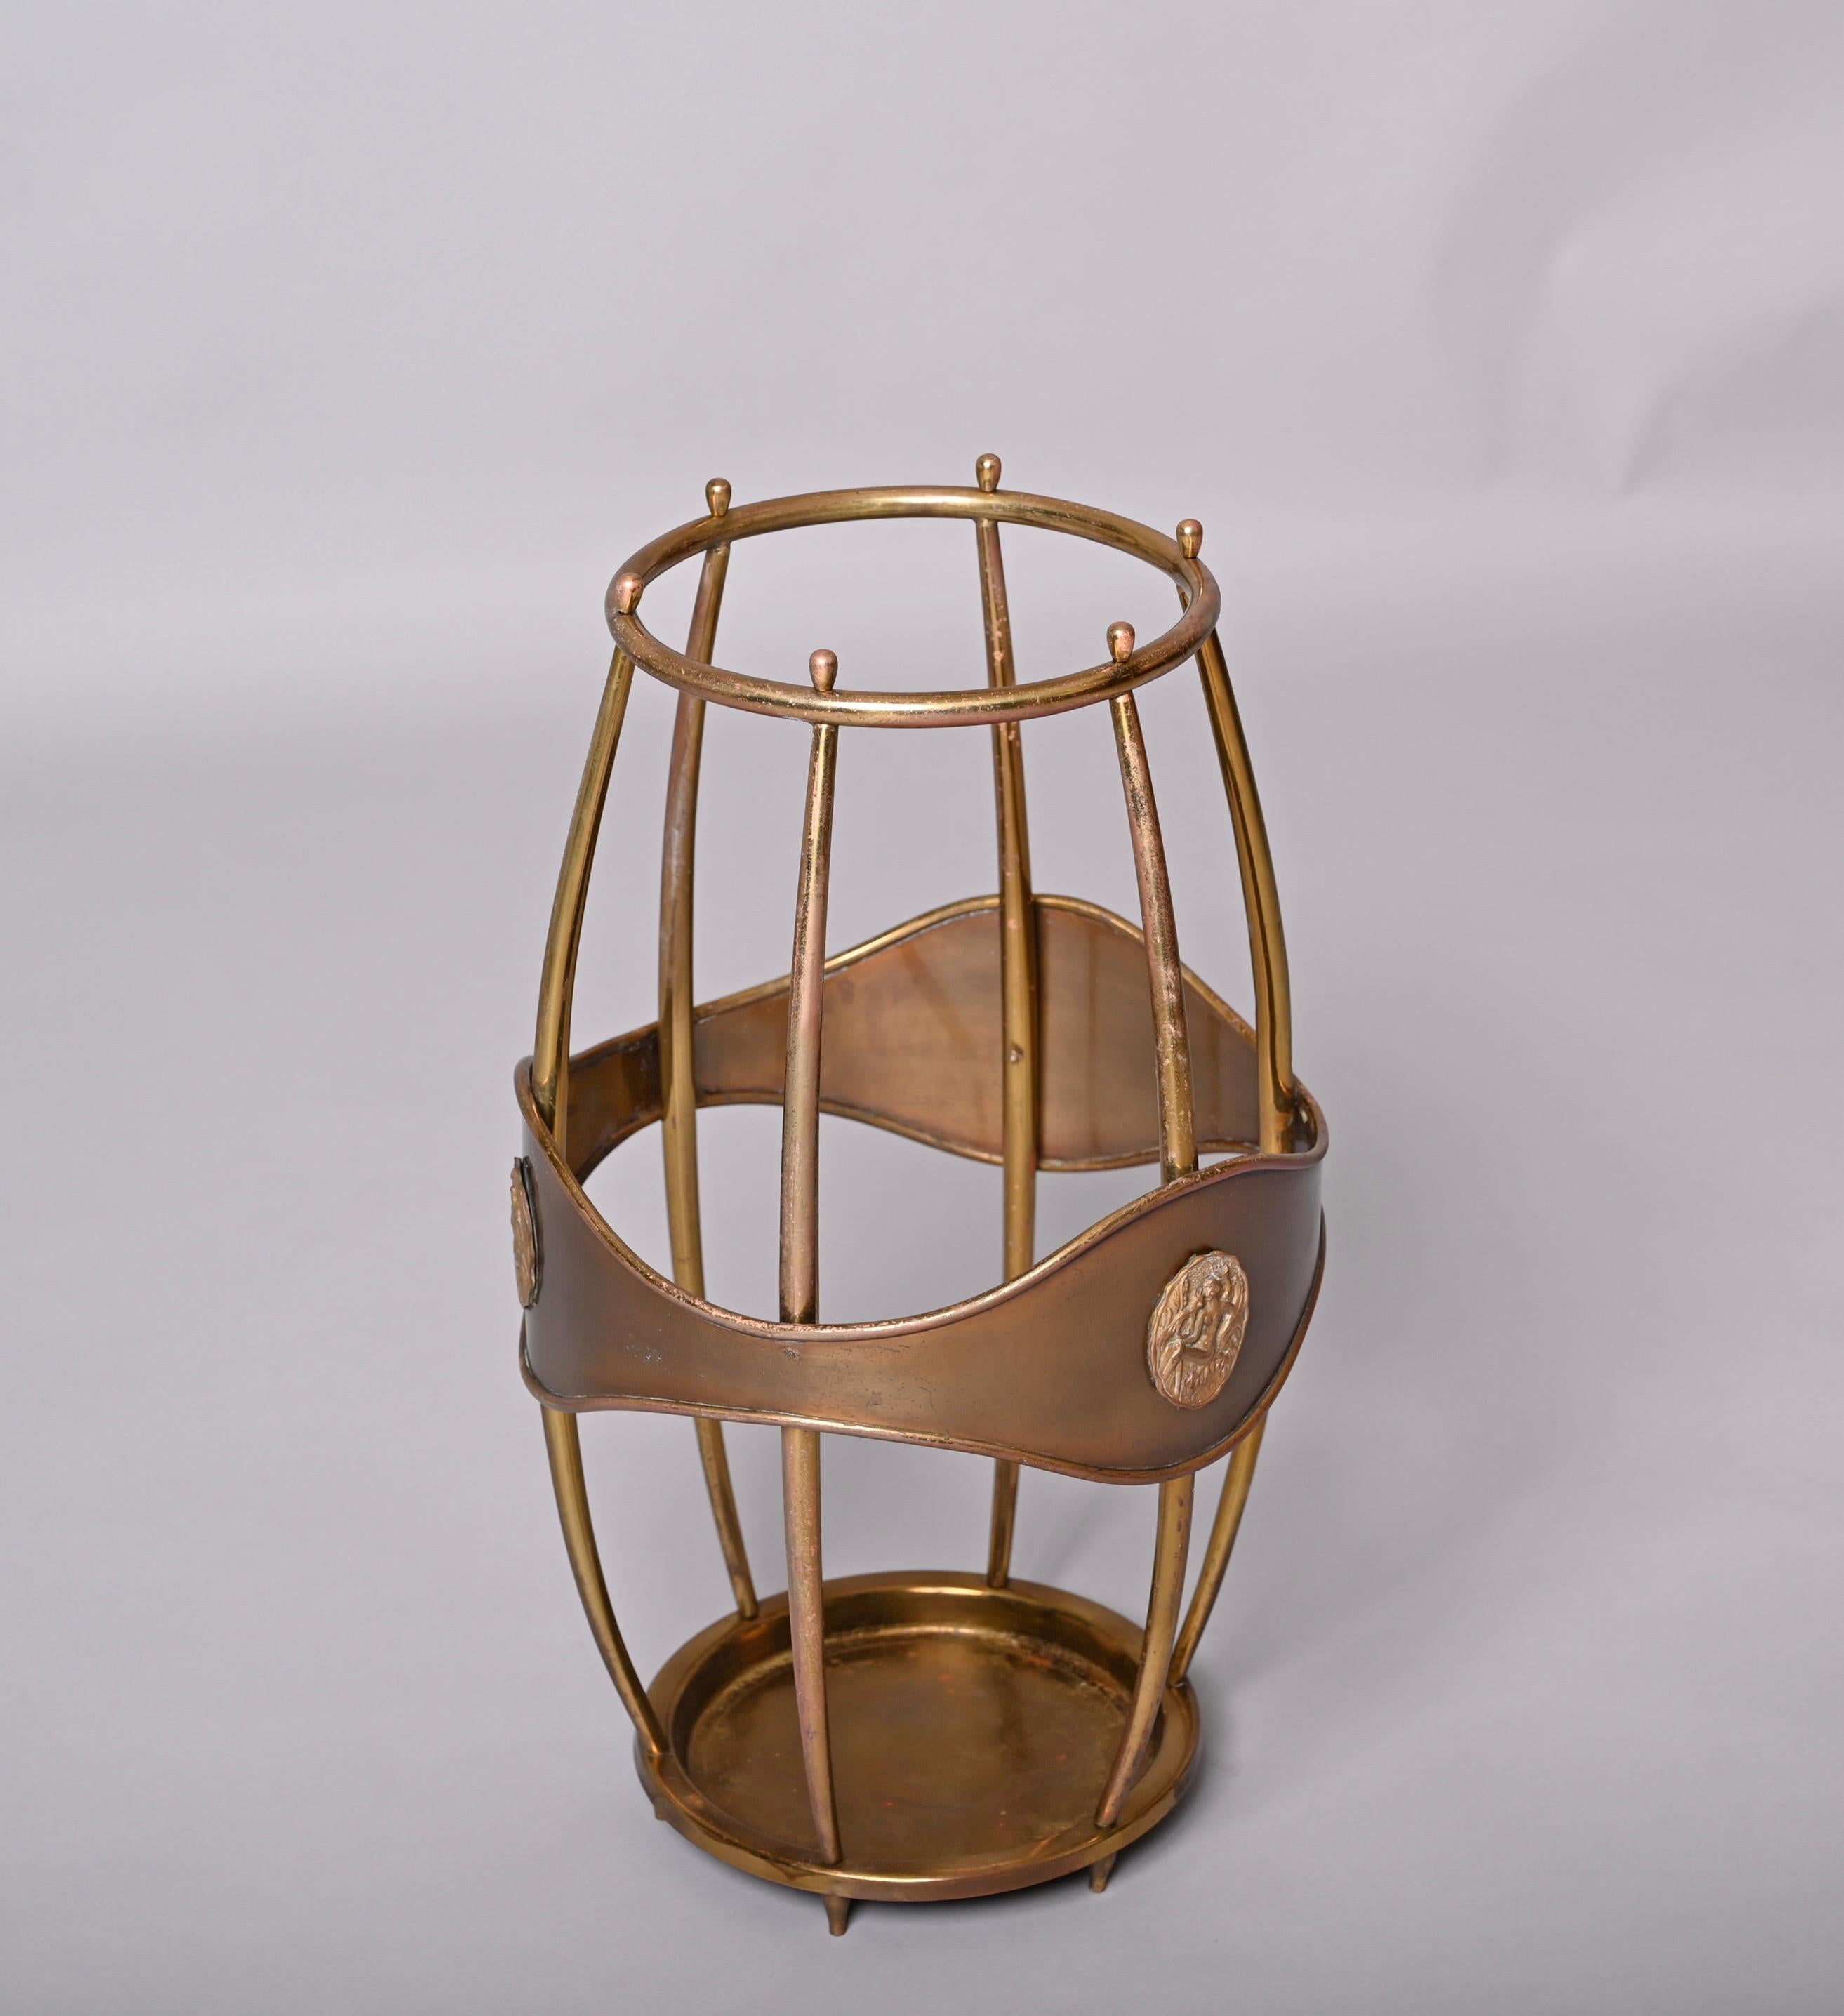 Midcentury Italian Brass Barrell-Shaped Umbrella Stand and Cane Holder, 1950s For Sale 10